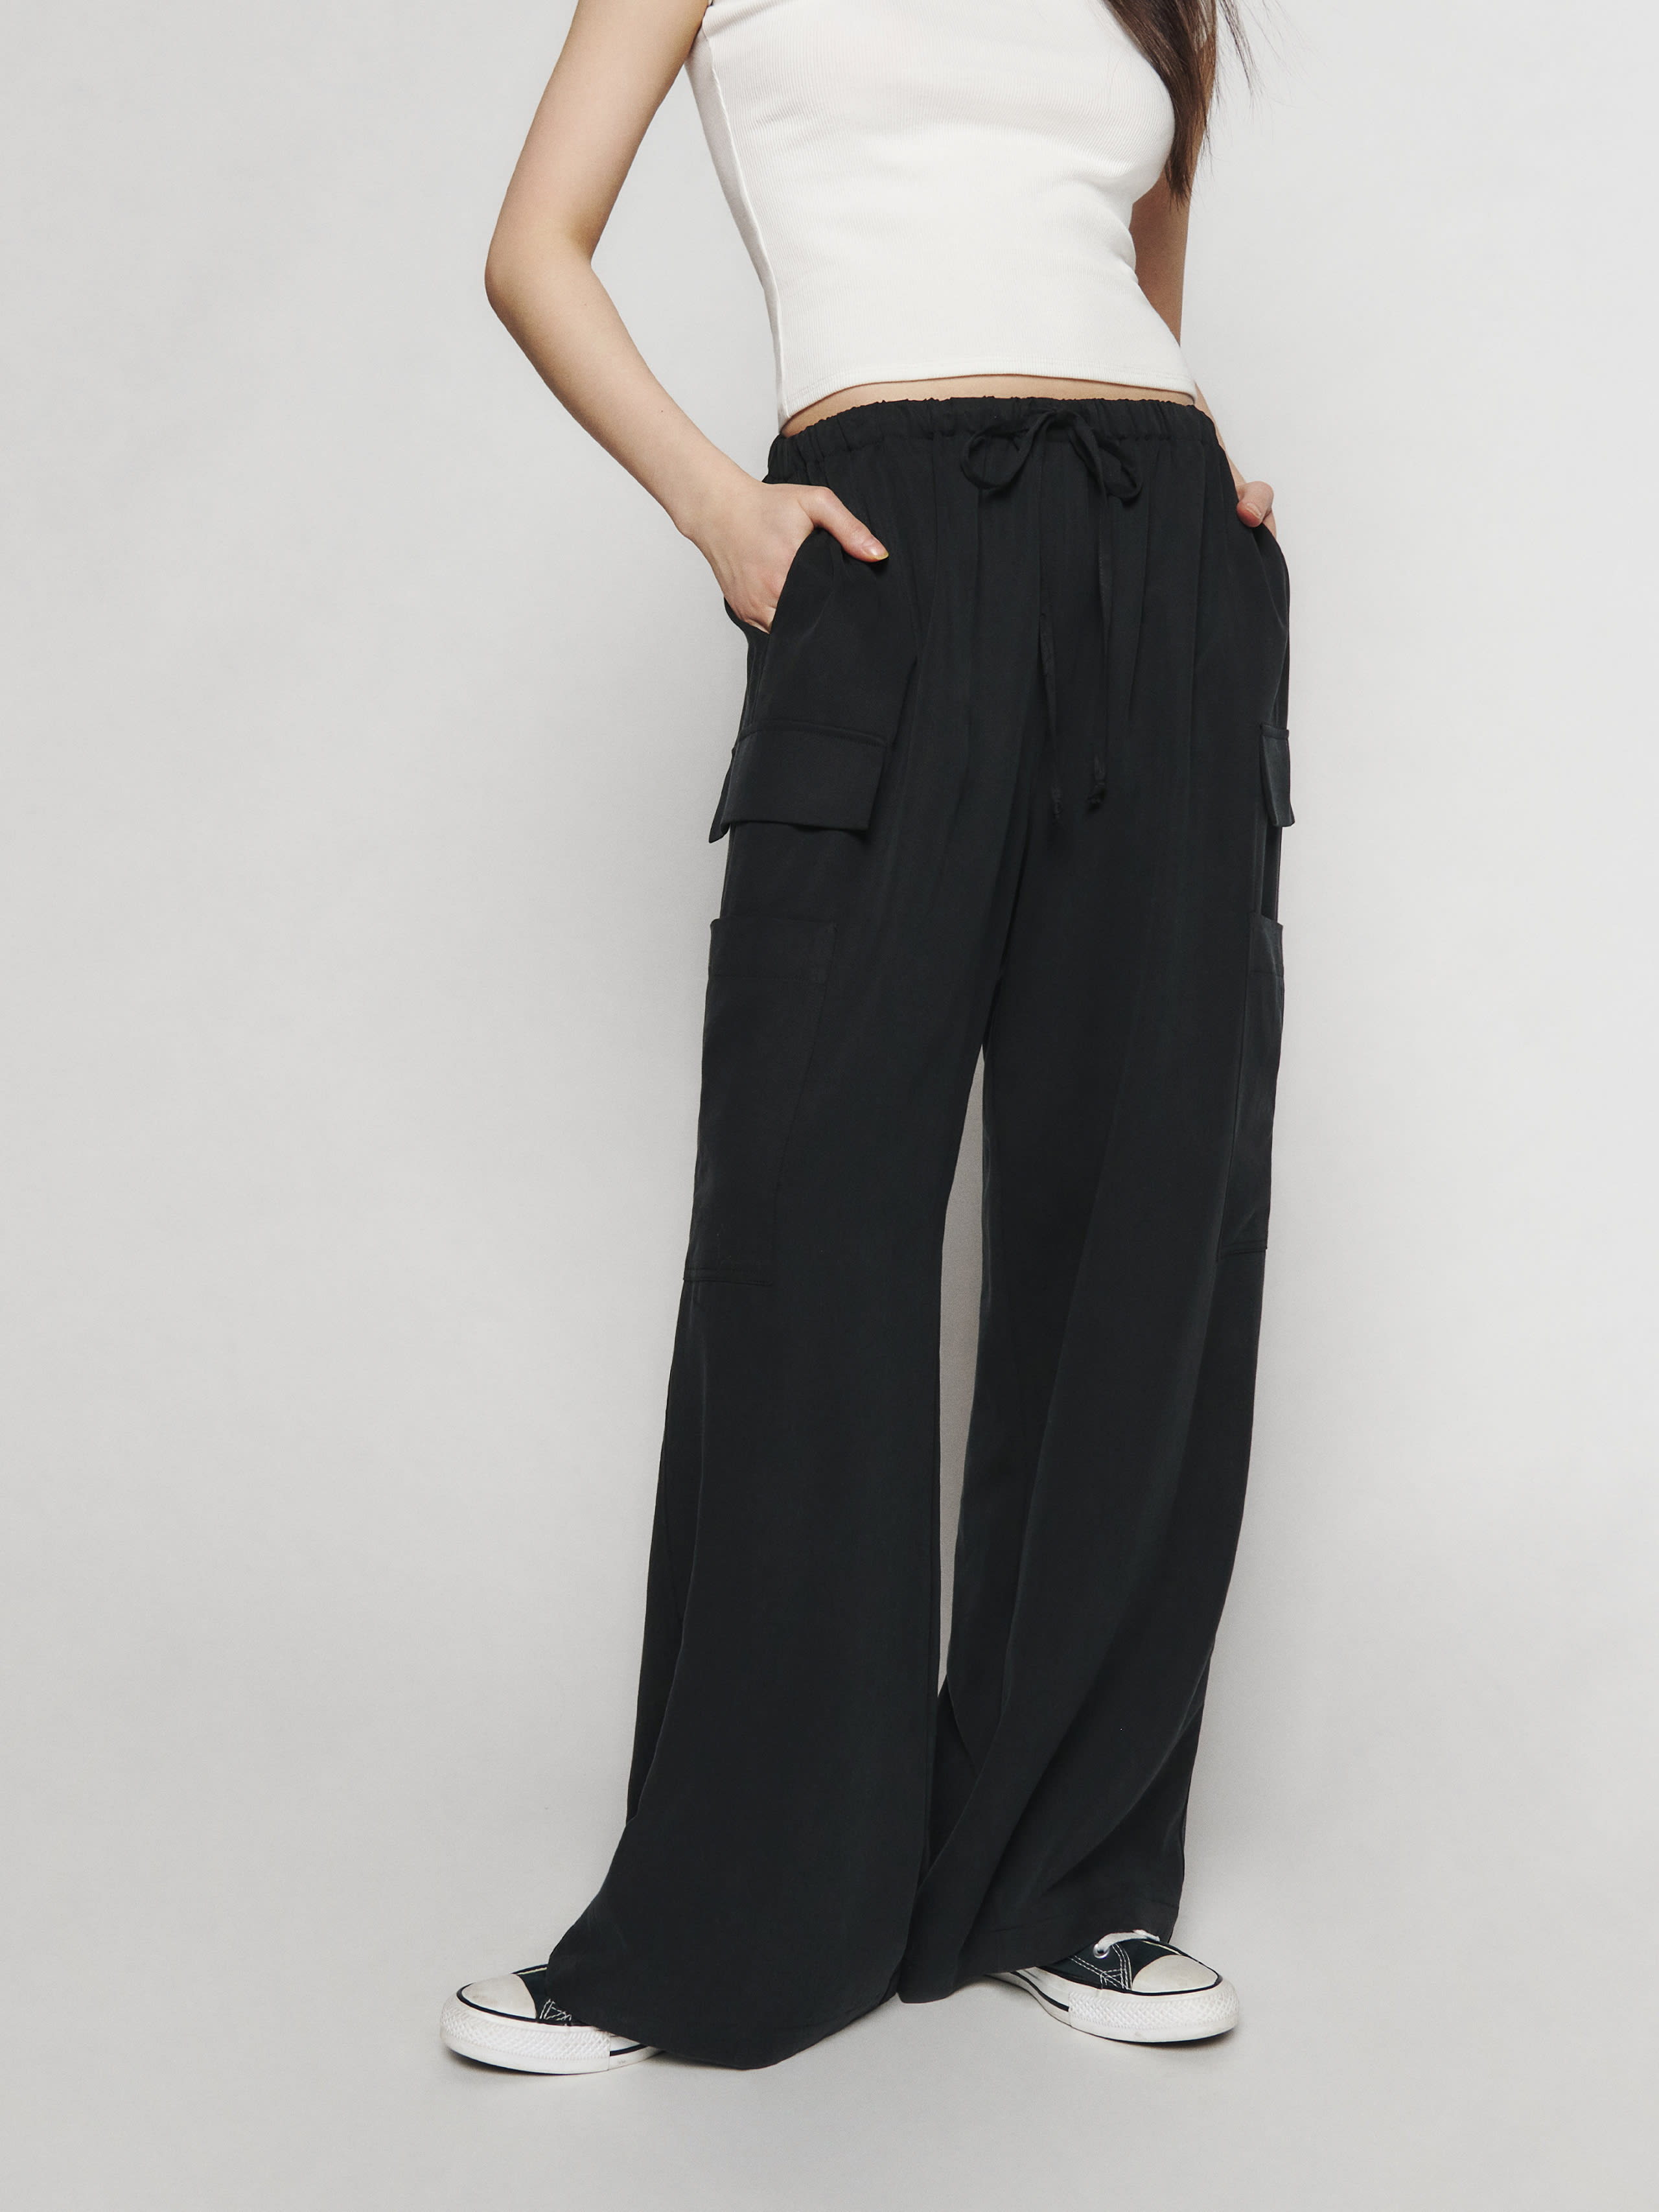 Reformation Ethan Twill Pant In Black